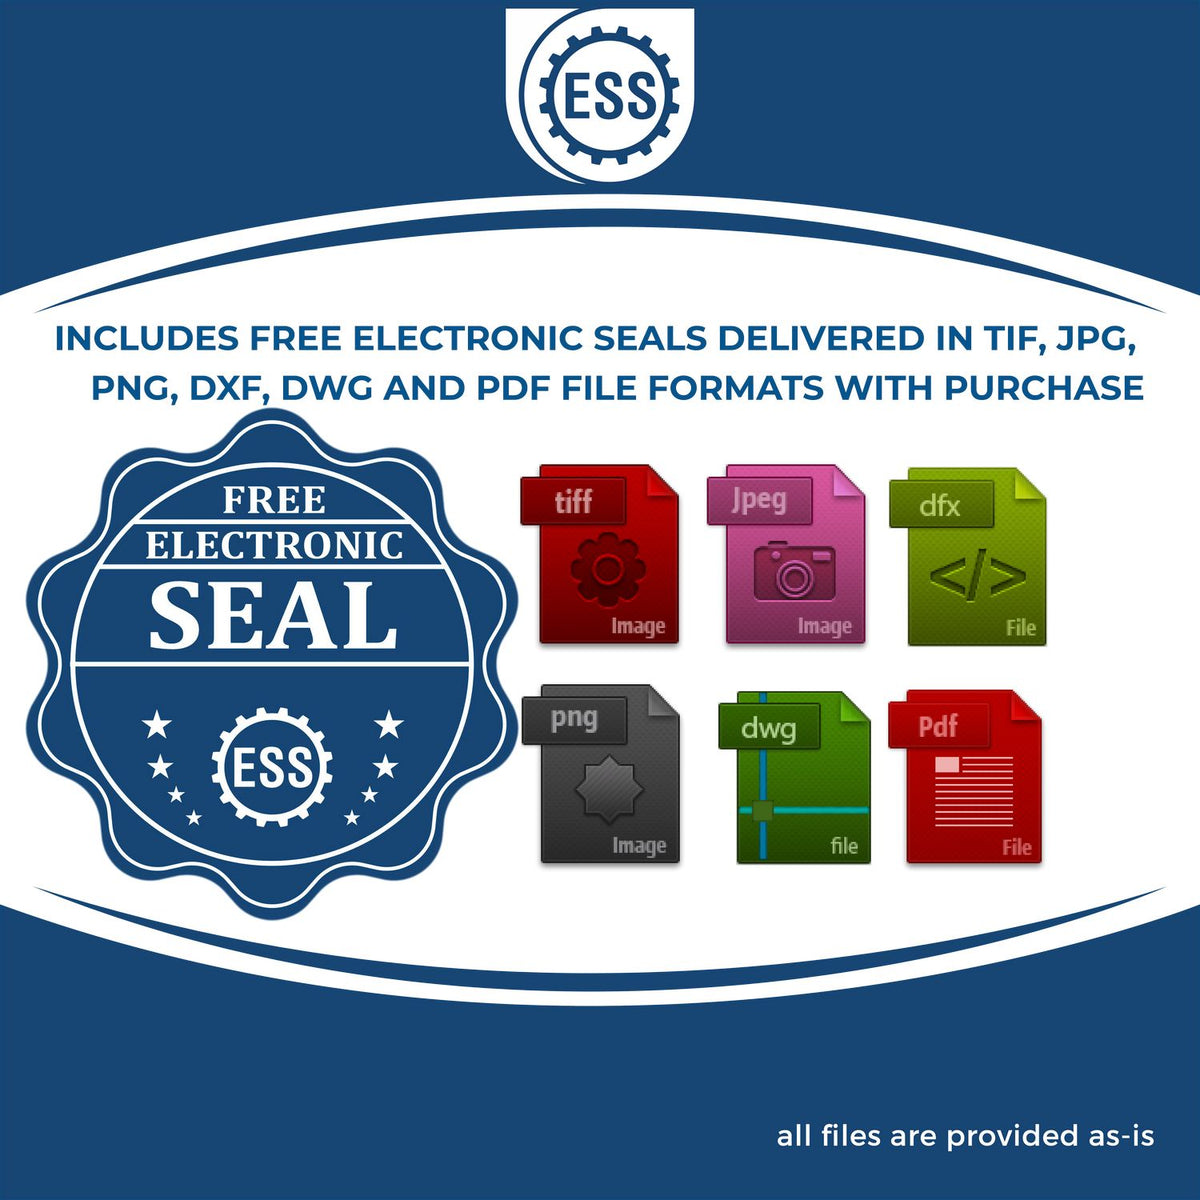 An infographic for the free electronic seal for the Self-Inking Utah Geologist Stamp illustrating the different file type icons such as DXF, DWG, TIF, JPG and PNG.